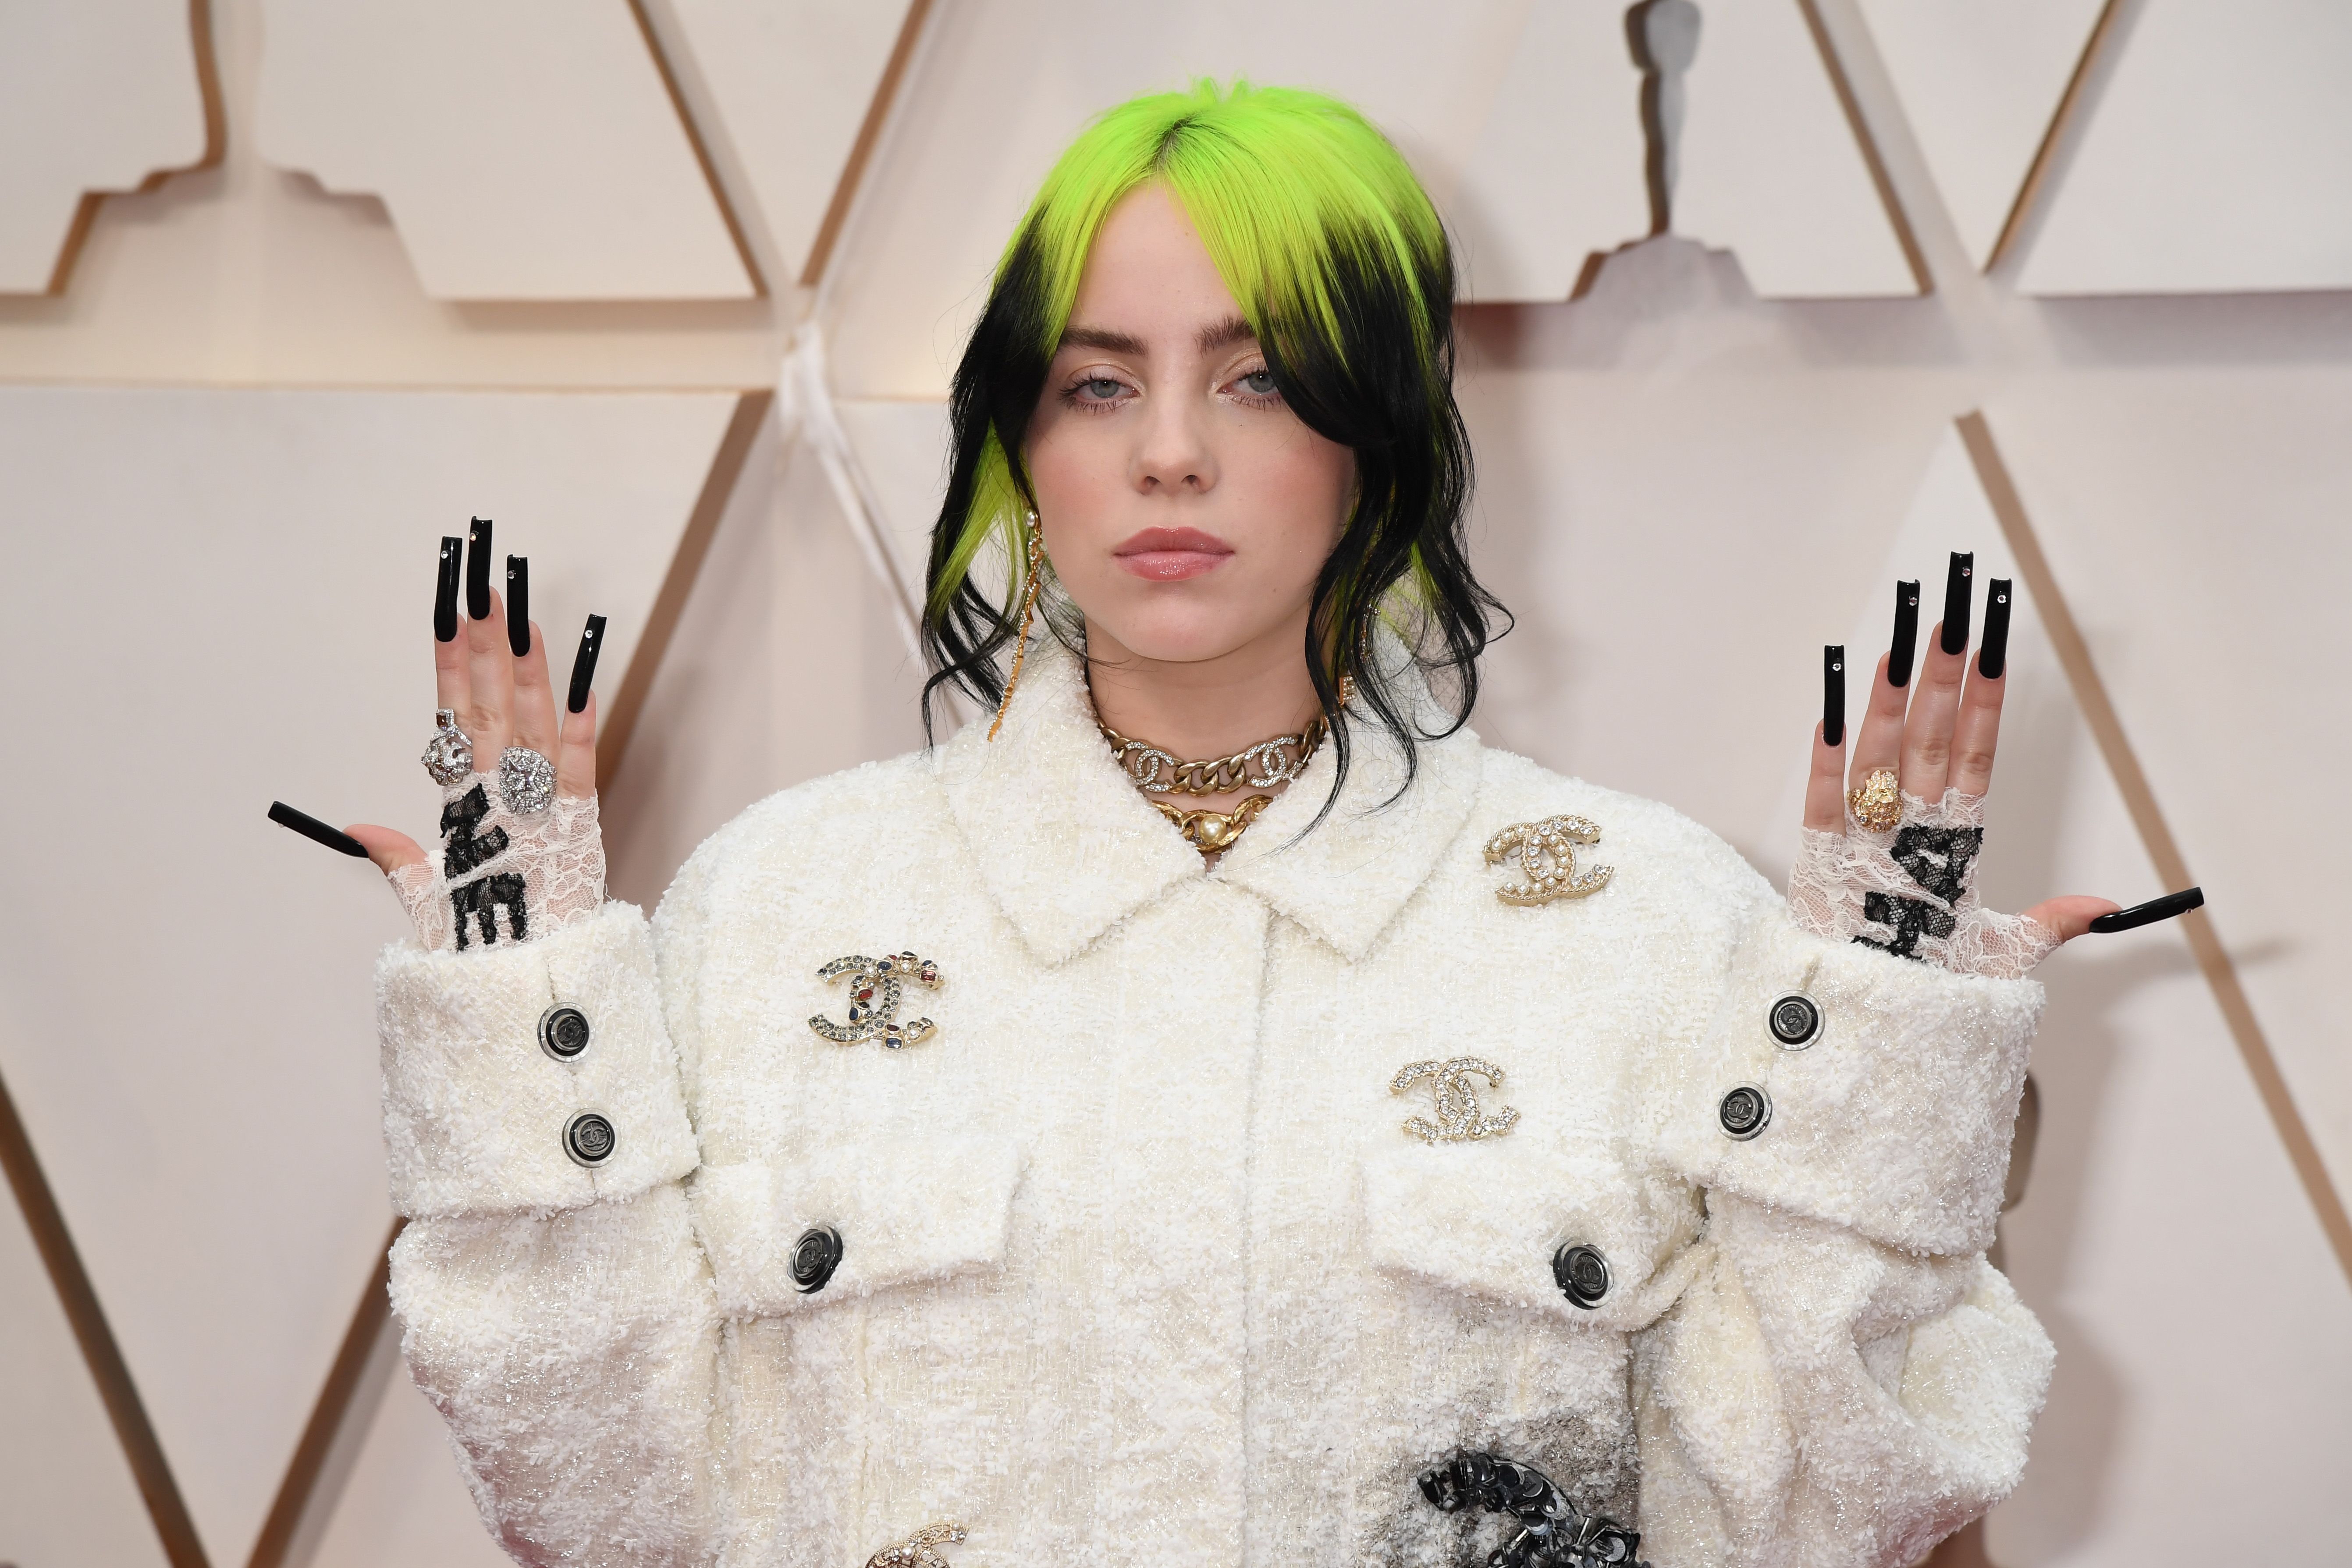 Billie Eilish On Being Body-Shamed And 'Normalising Real Bodies'